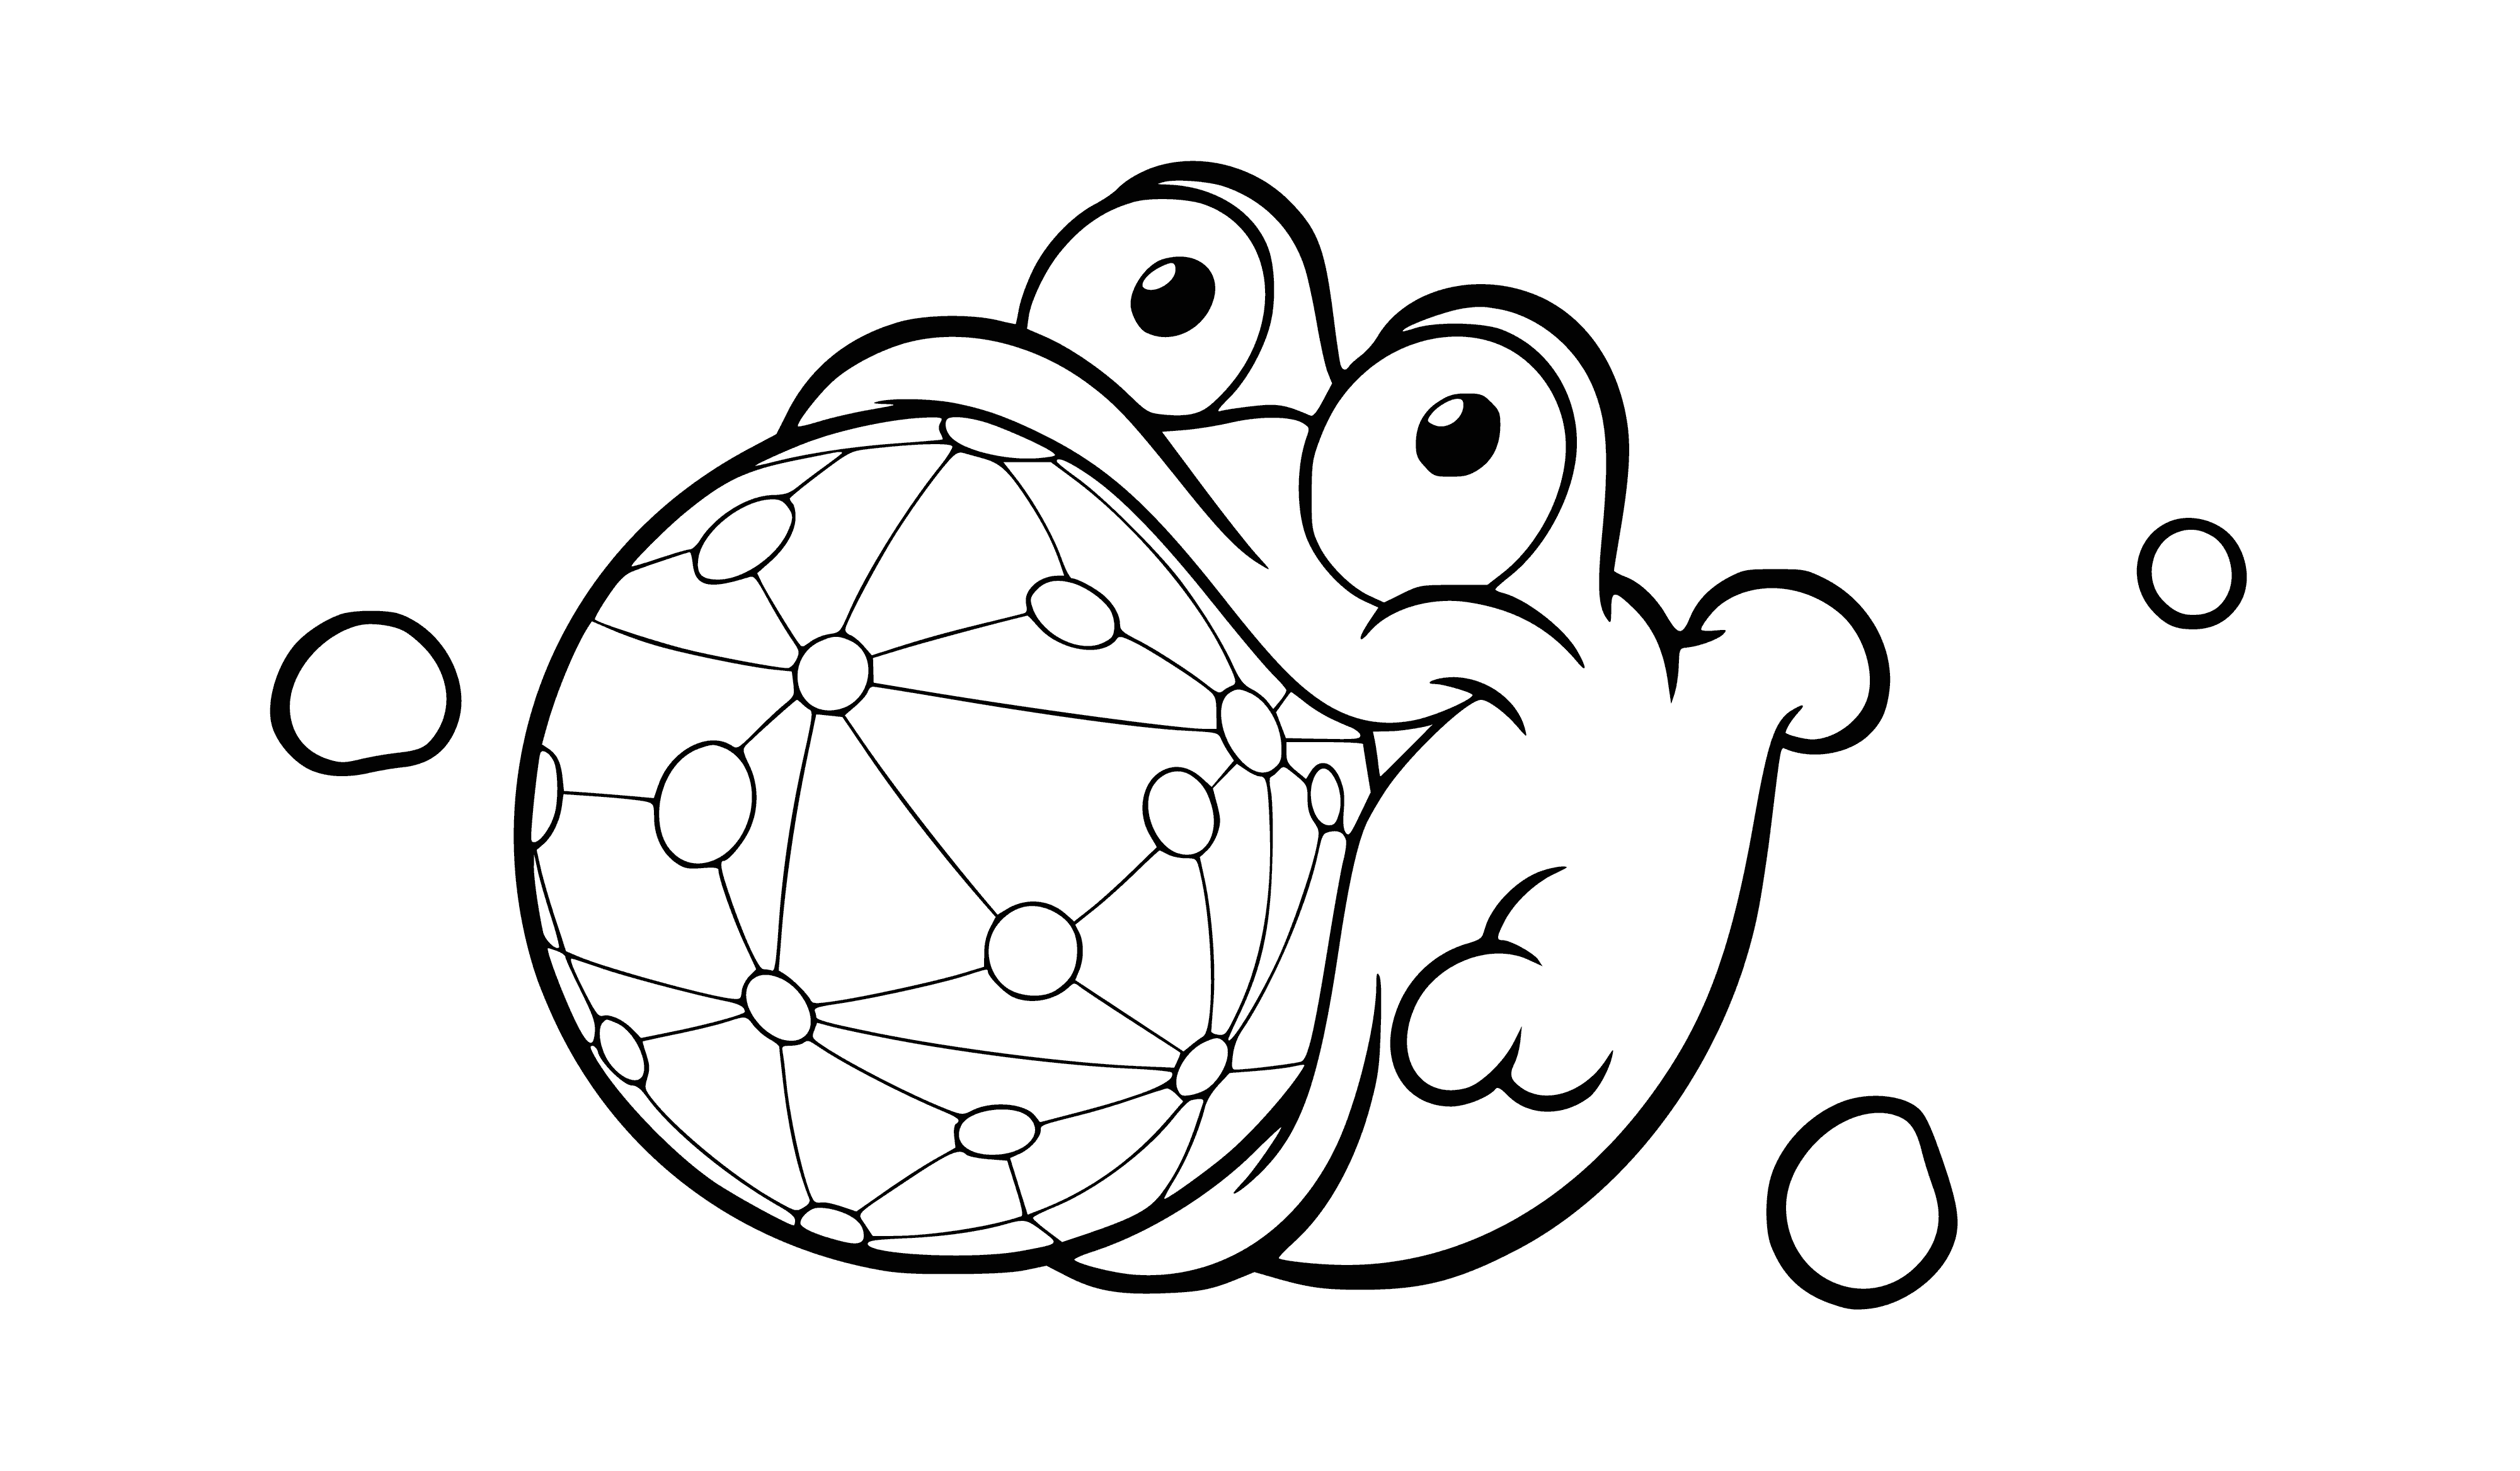 coloring page: Circular object with raised bumps has small hole in center, & multi-colored curved lines around edge converging in center.